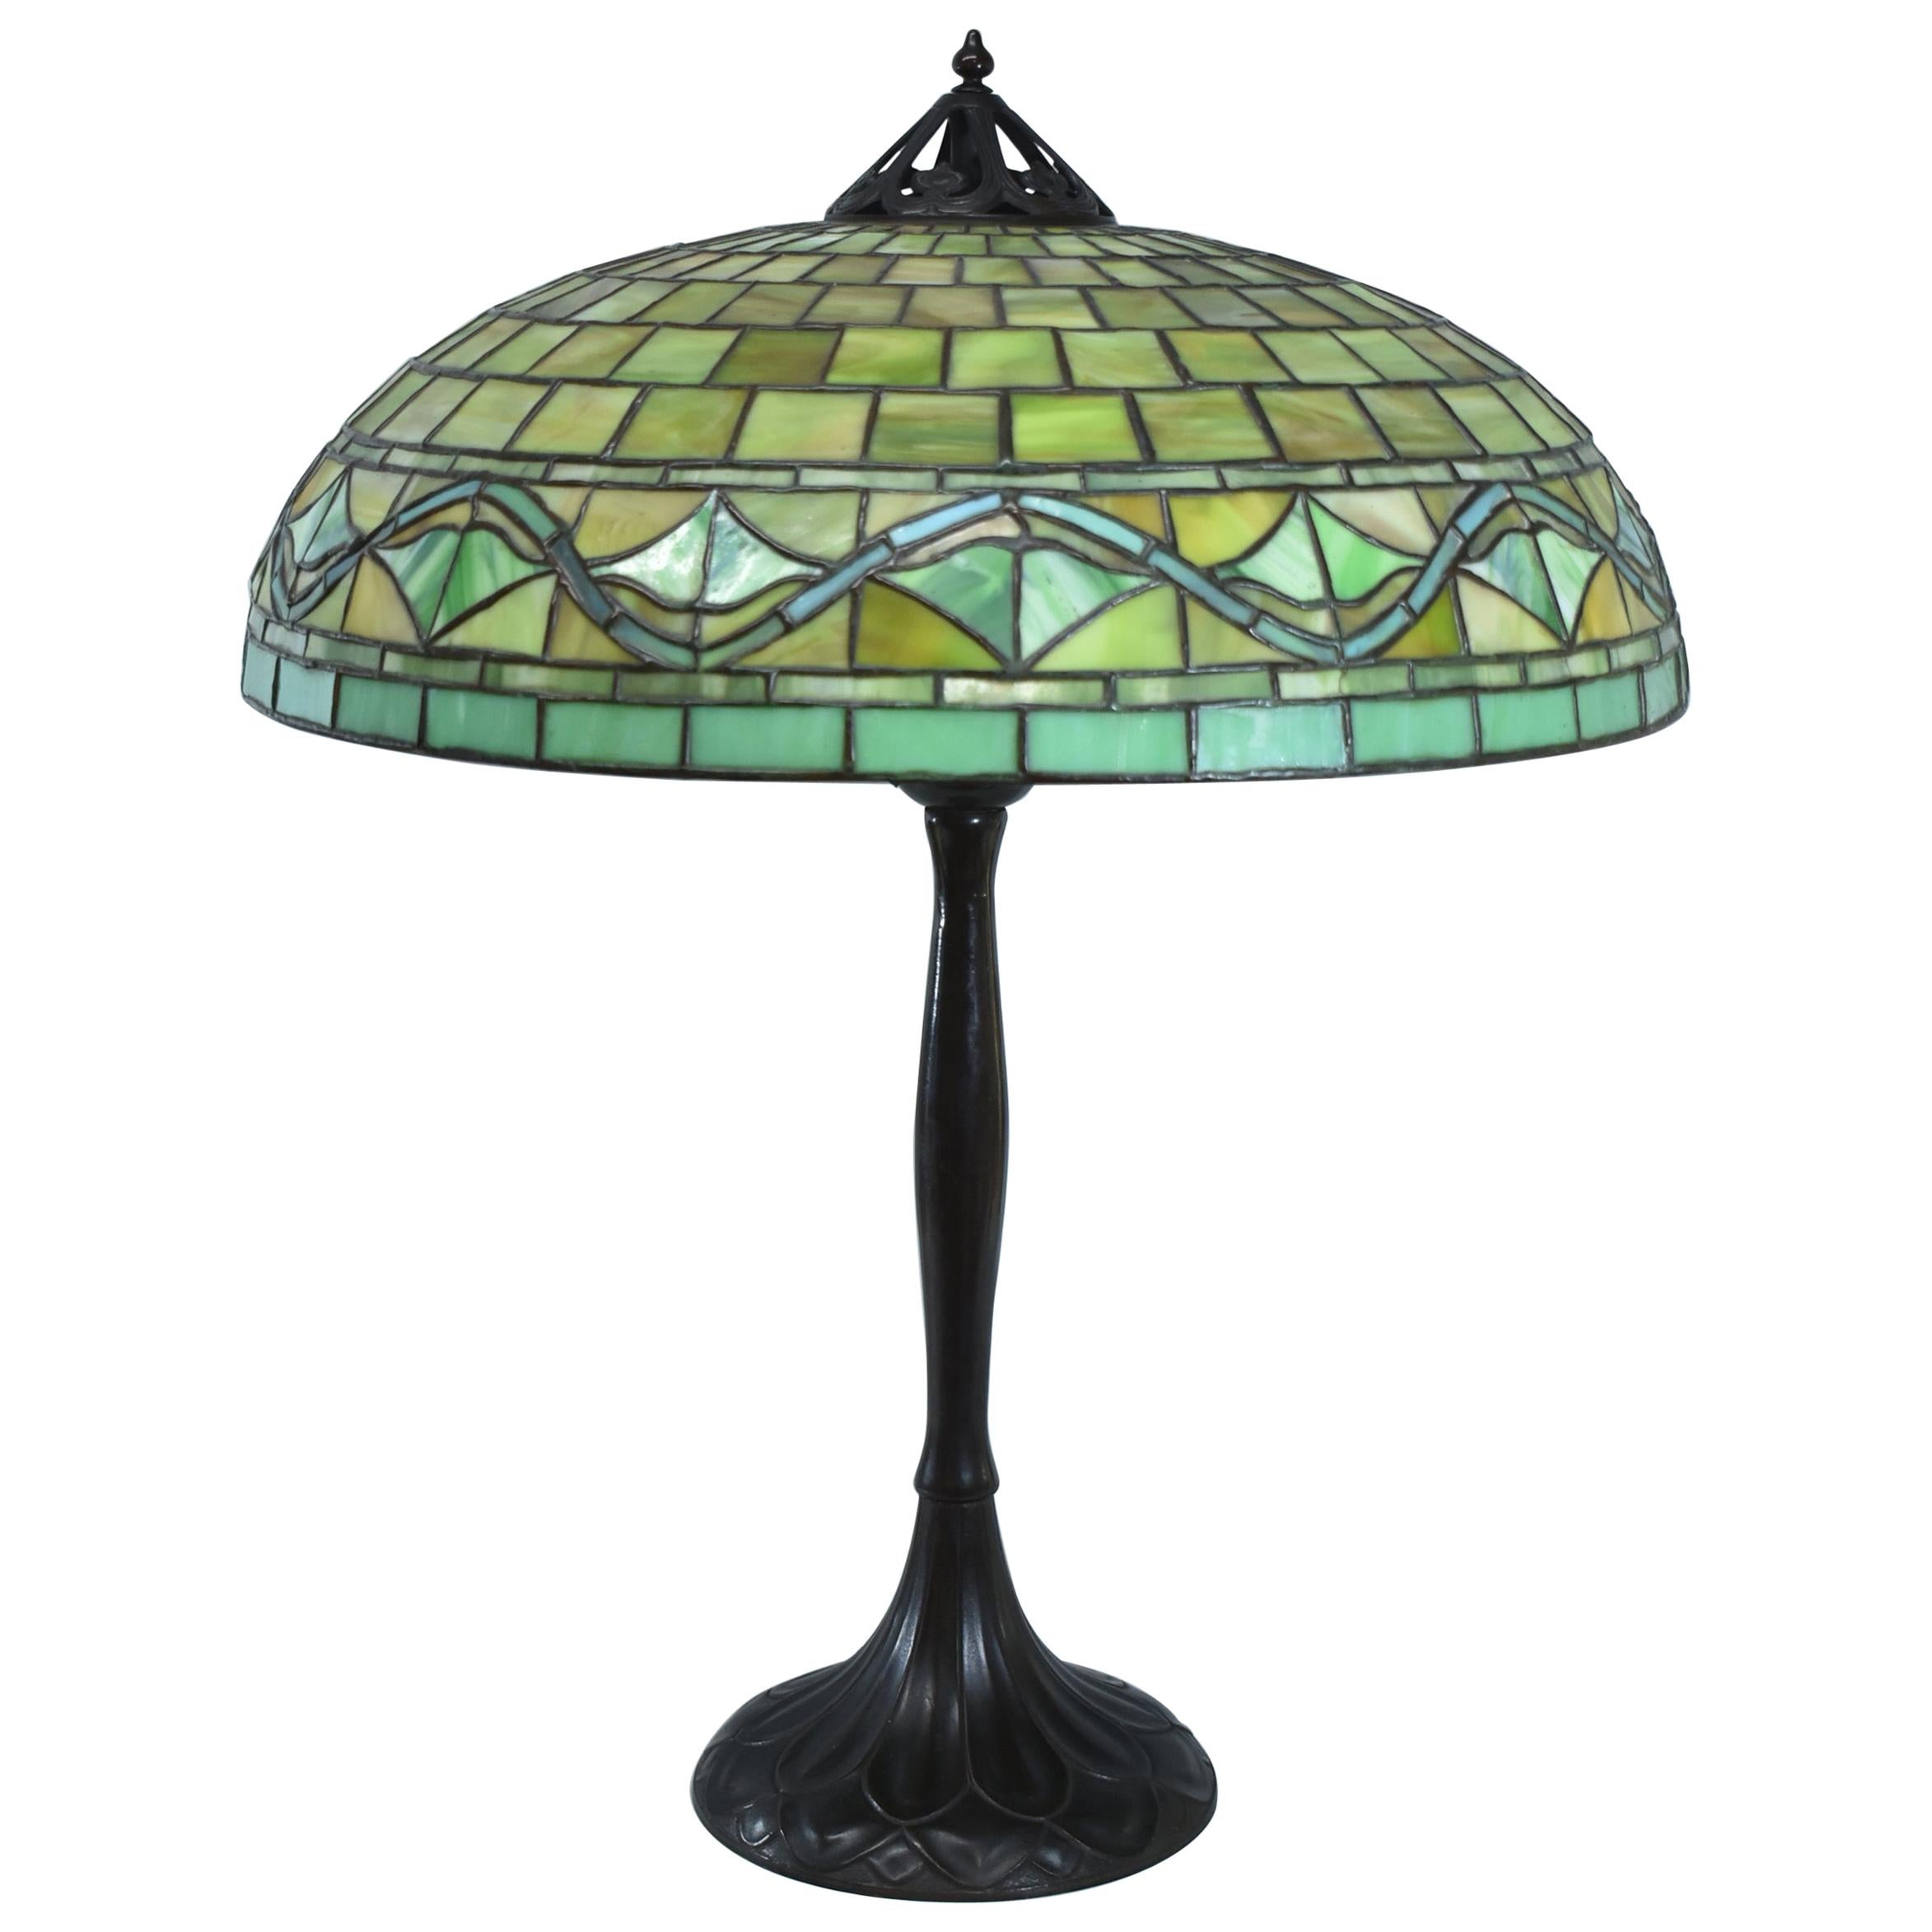 Large Scale Arts & Crafts Handel Leaded Glass Lamp with Shade